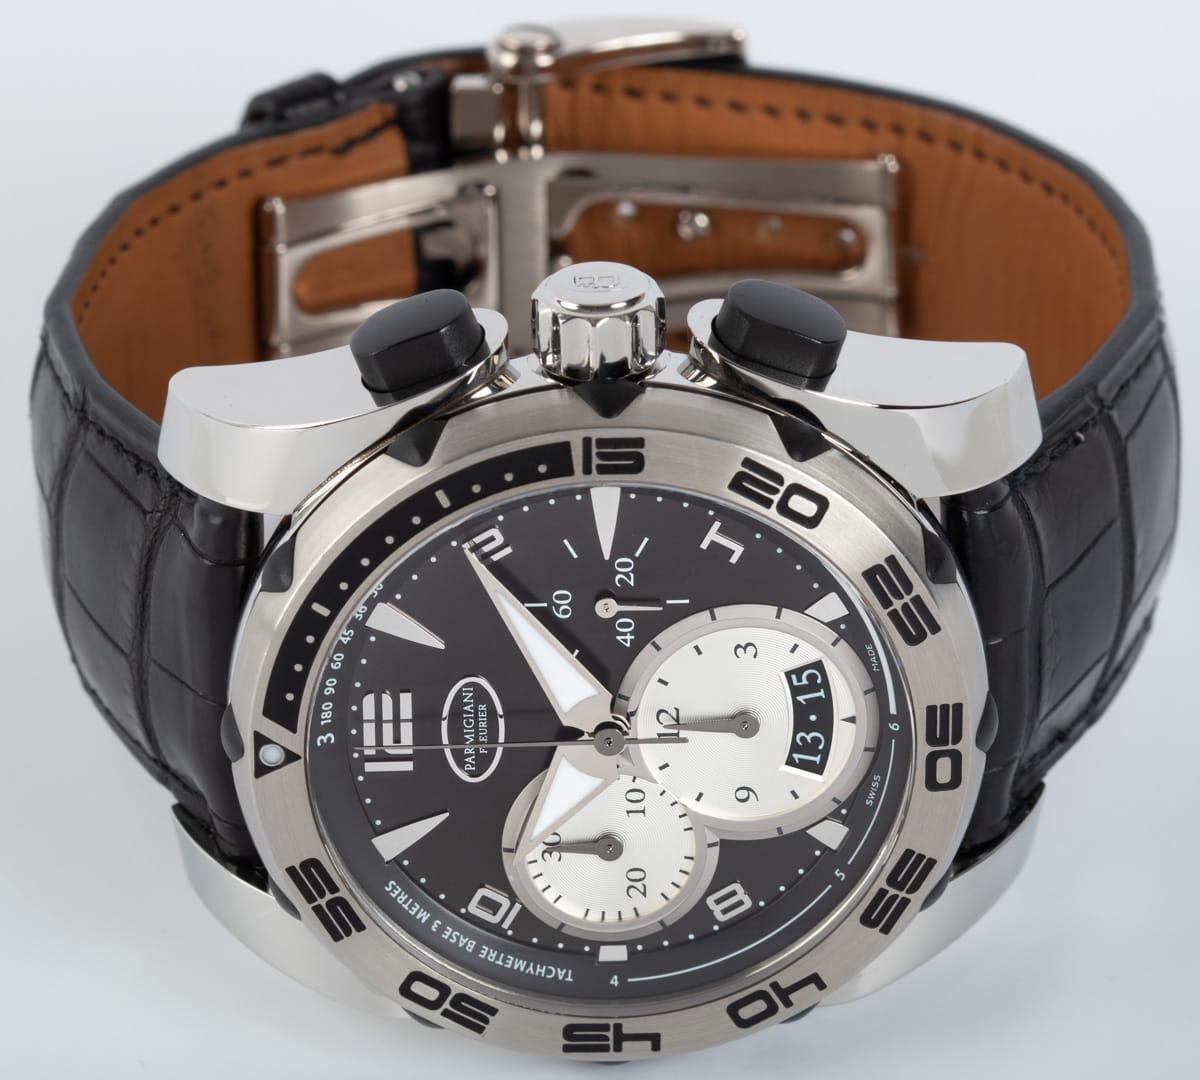 Front View of Pershing 005 45 Chronograph